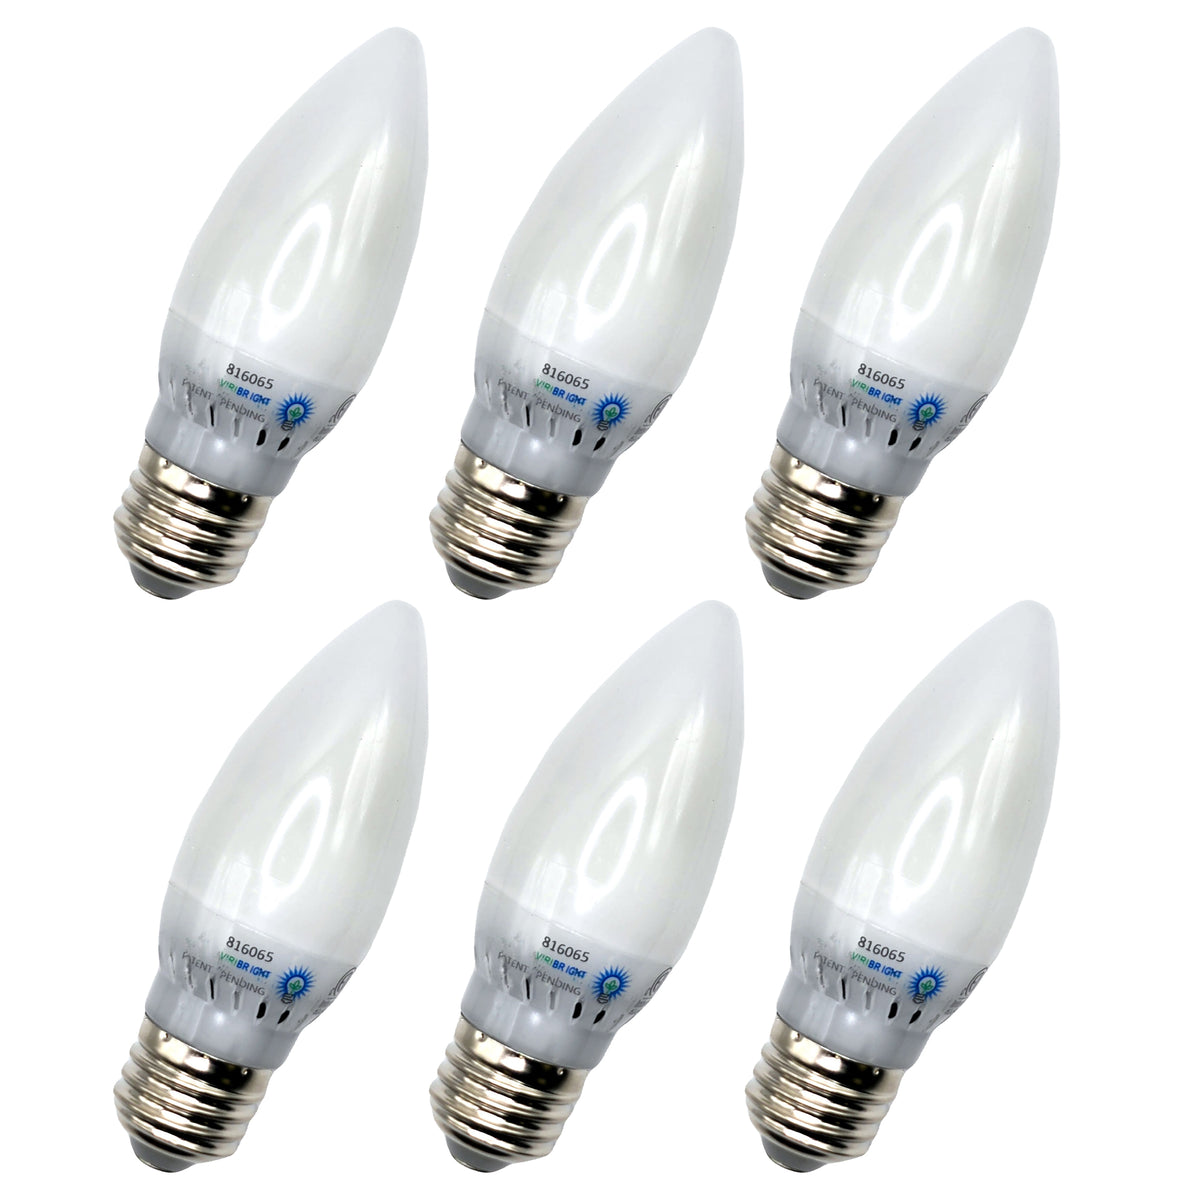 Picture of Viribright 753639-6 3.2W 40W Equivalent 6500K E26 LED Chand Daylight Bulb - Pack of 6